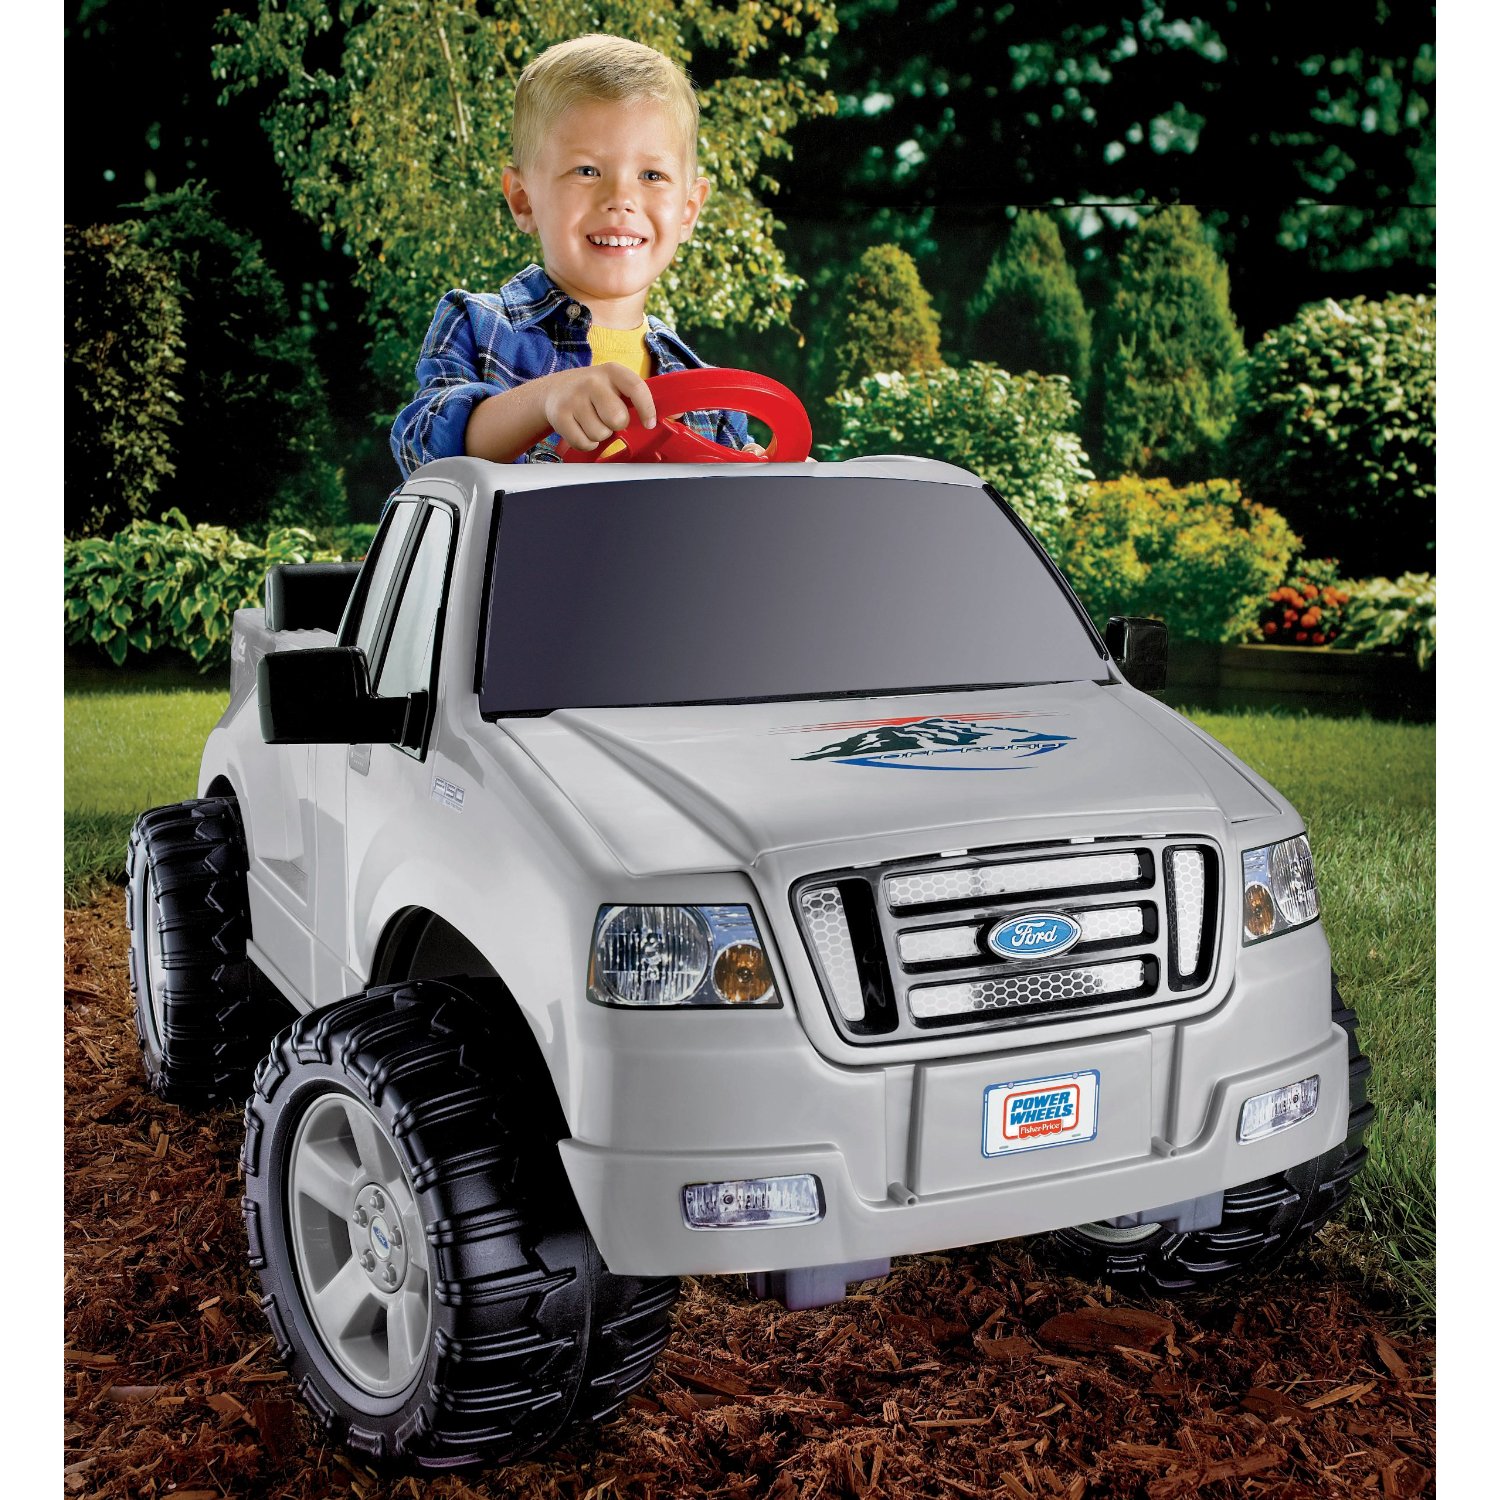 Free Bloggers Event – Power Wheels Ford F150 Ride-on Toy Giveaway